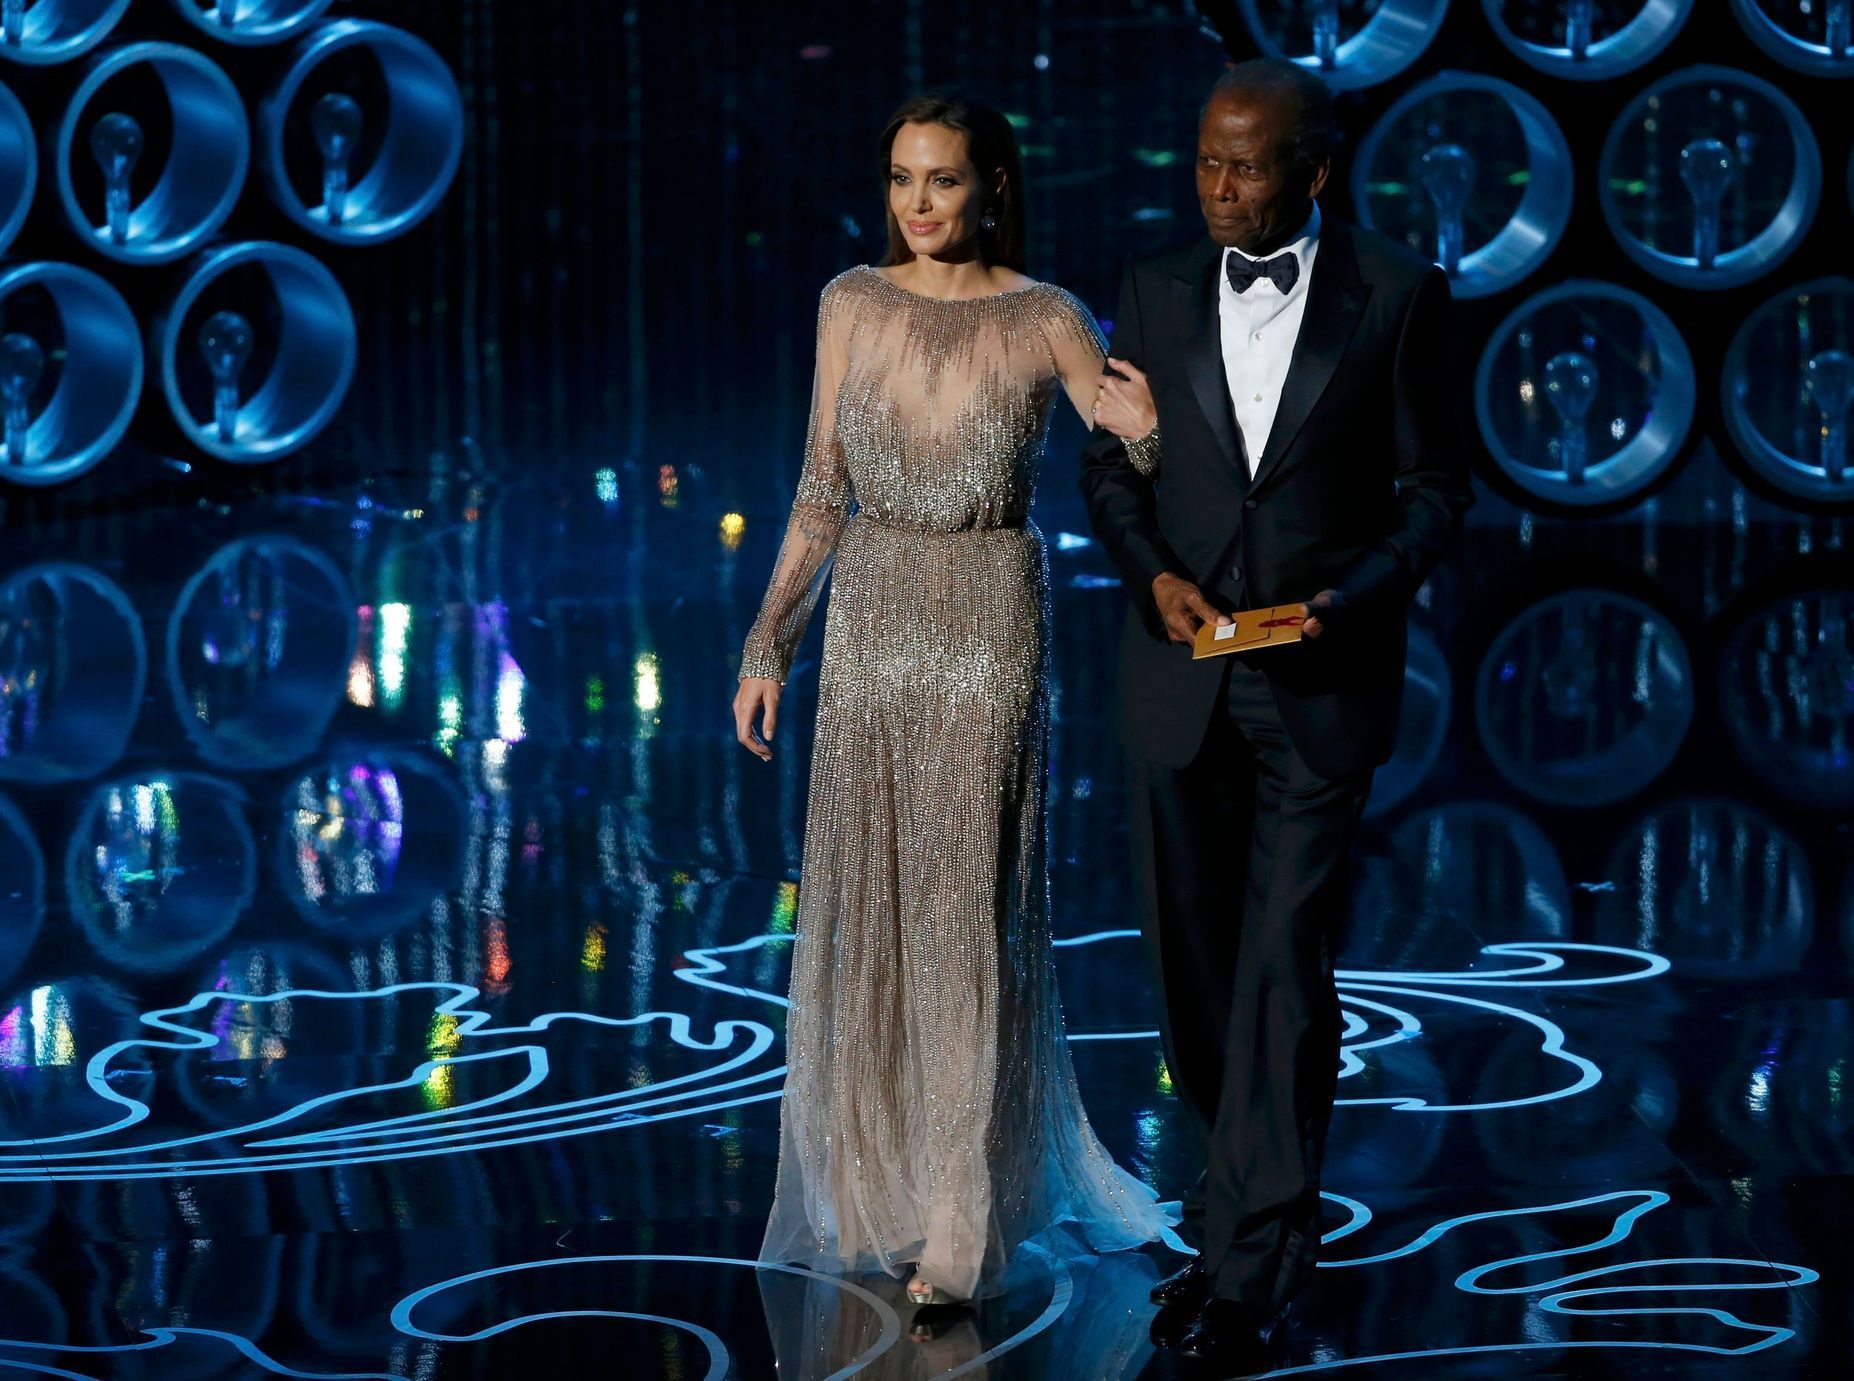 Actors Jolie and Poitier take the stage to present the Oscar for achievement in directing at the 86th Academy Awards in Hollywood